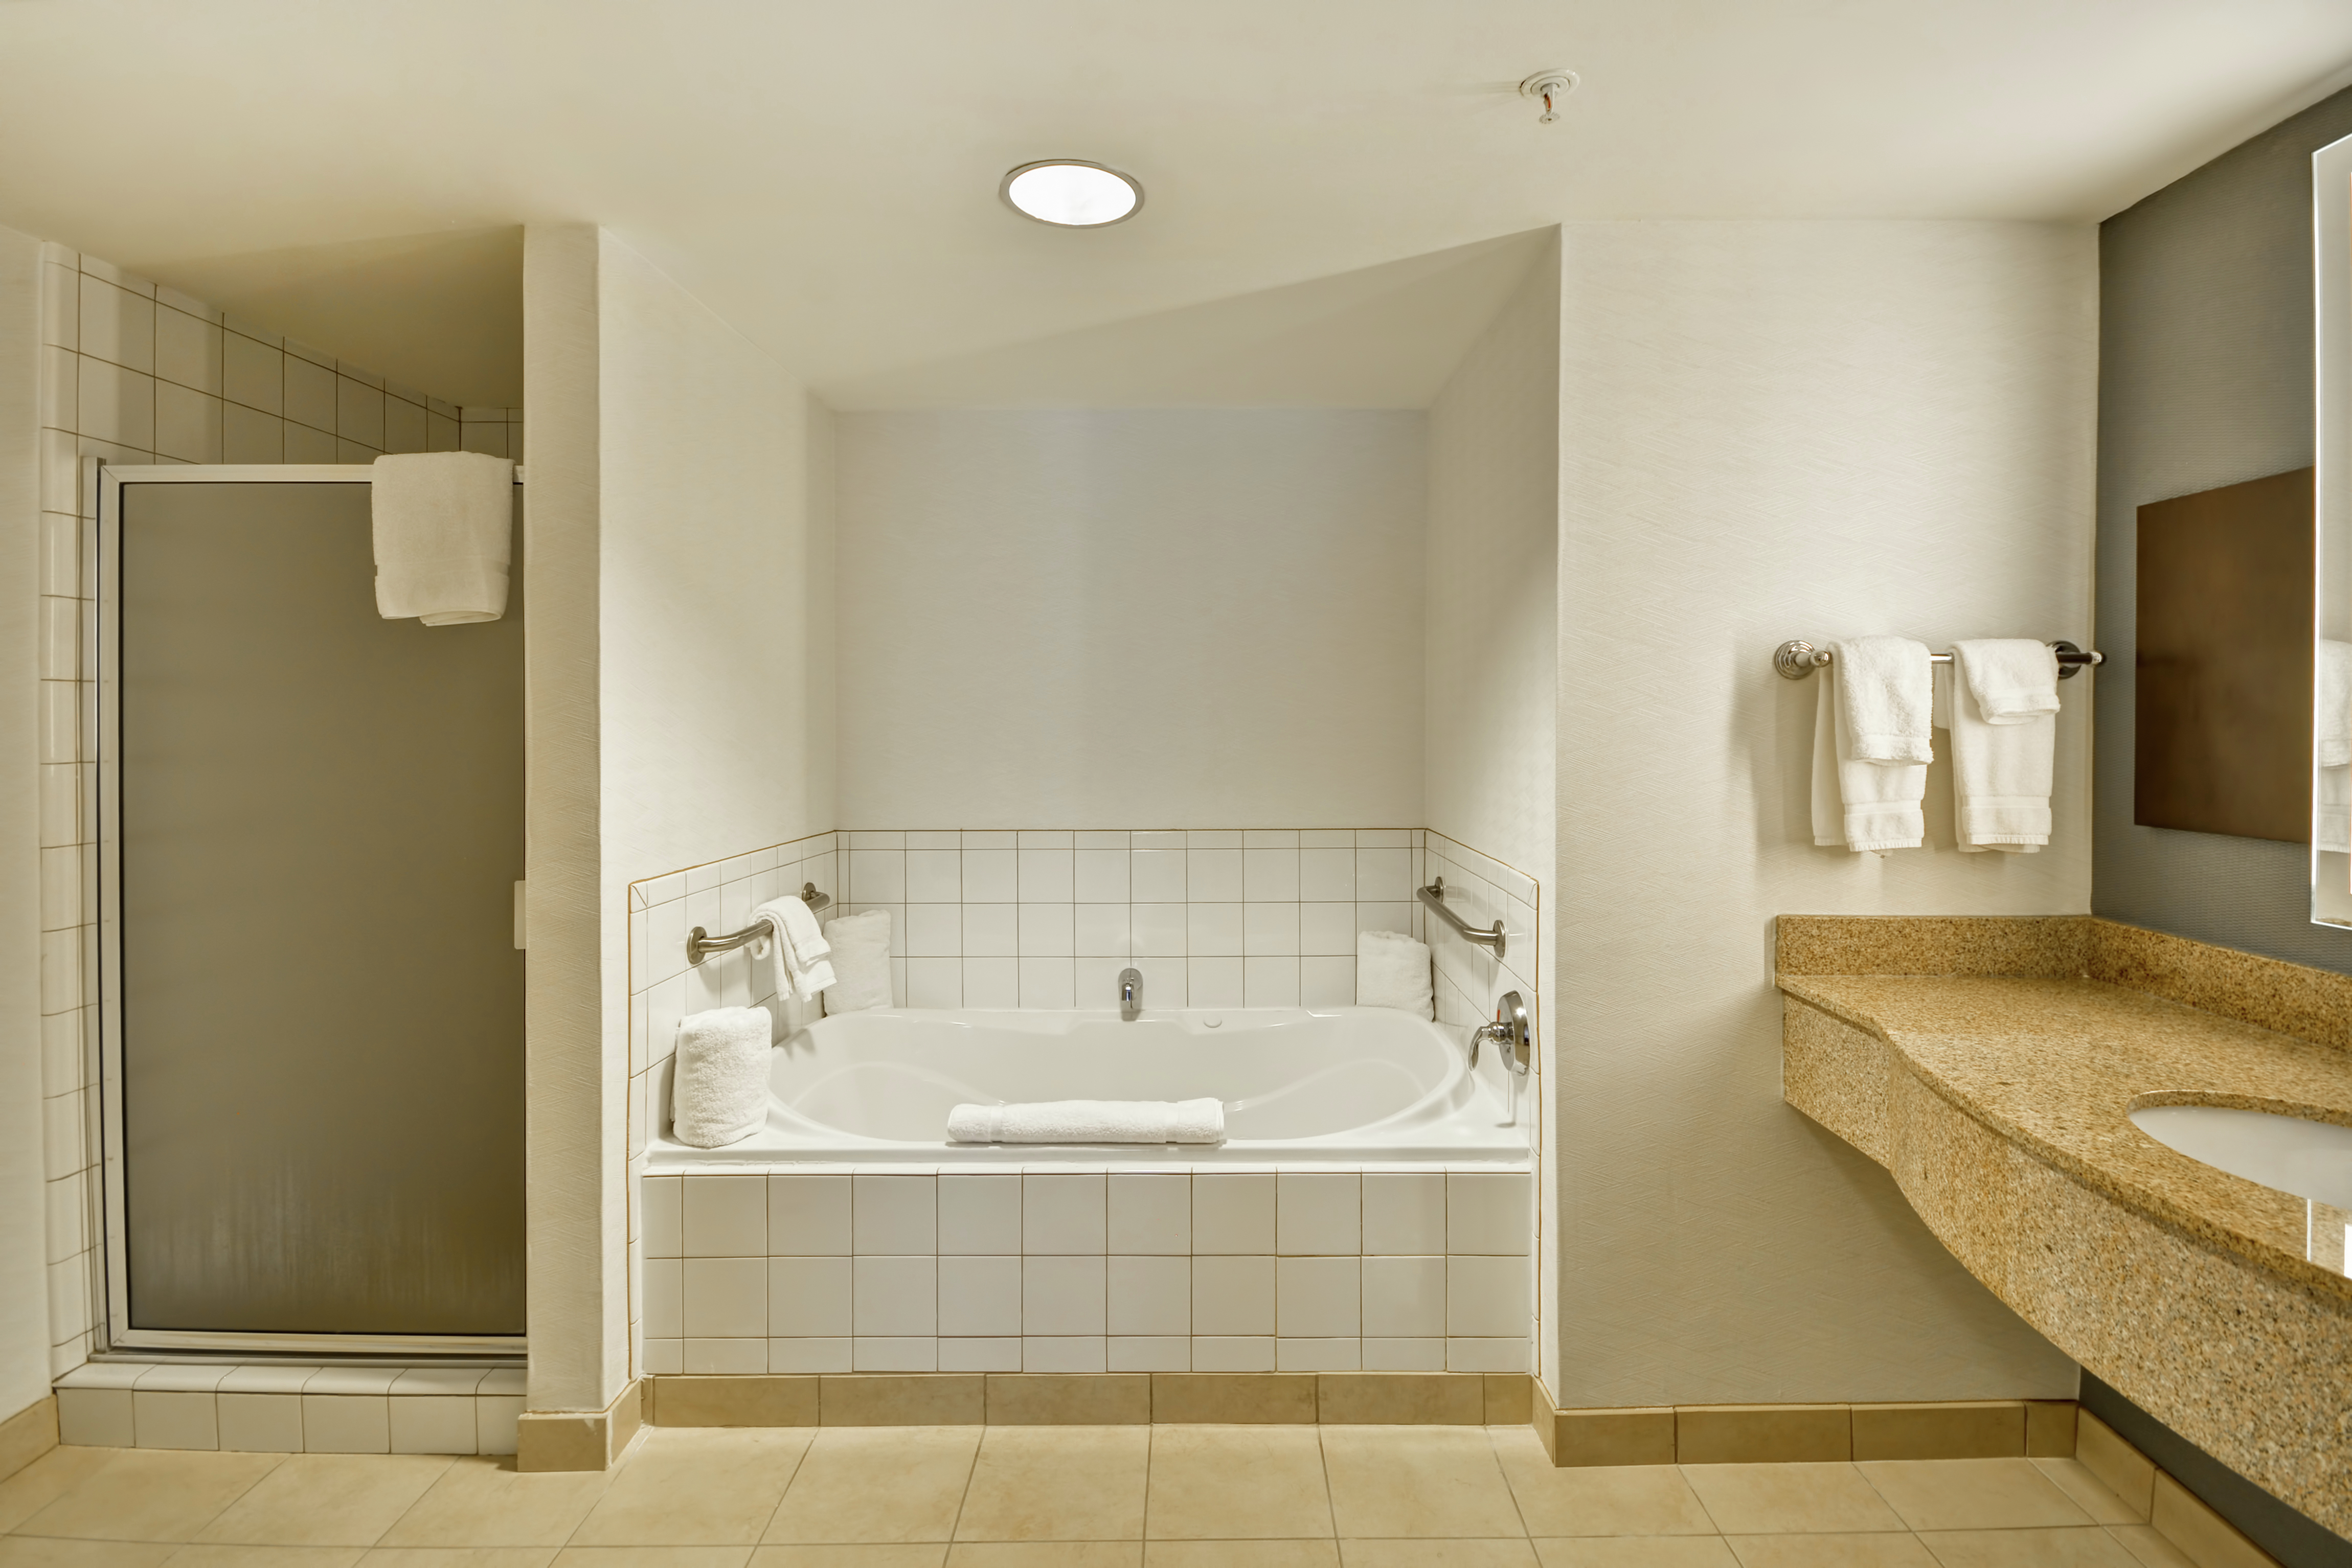 King Whirlpool Suite Tub And Shower